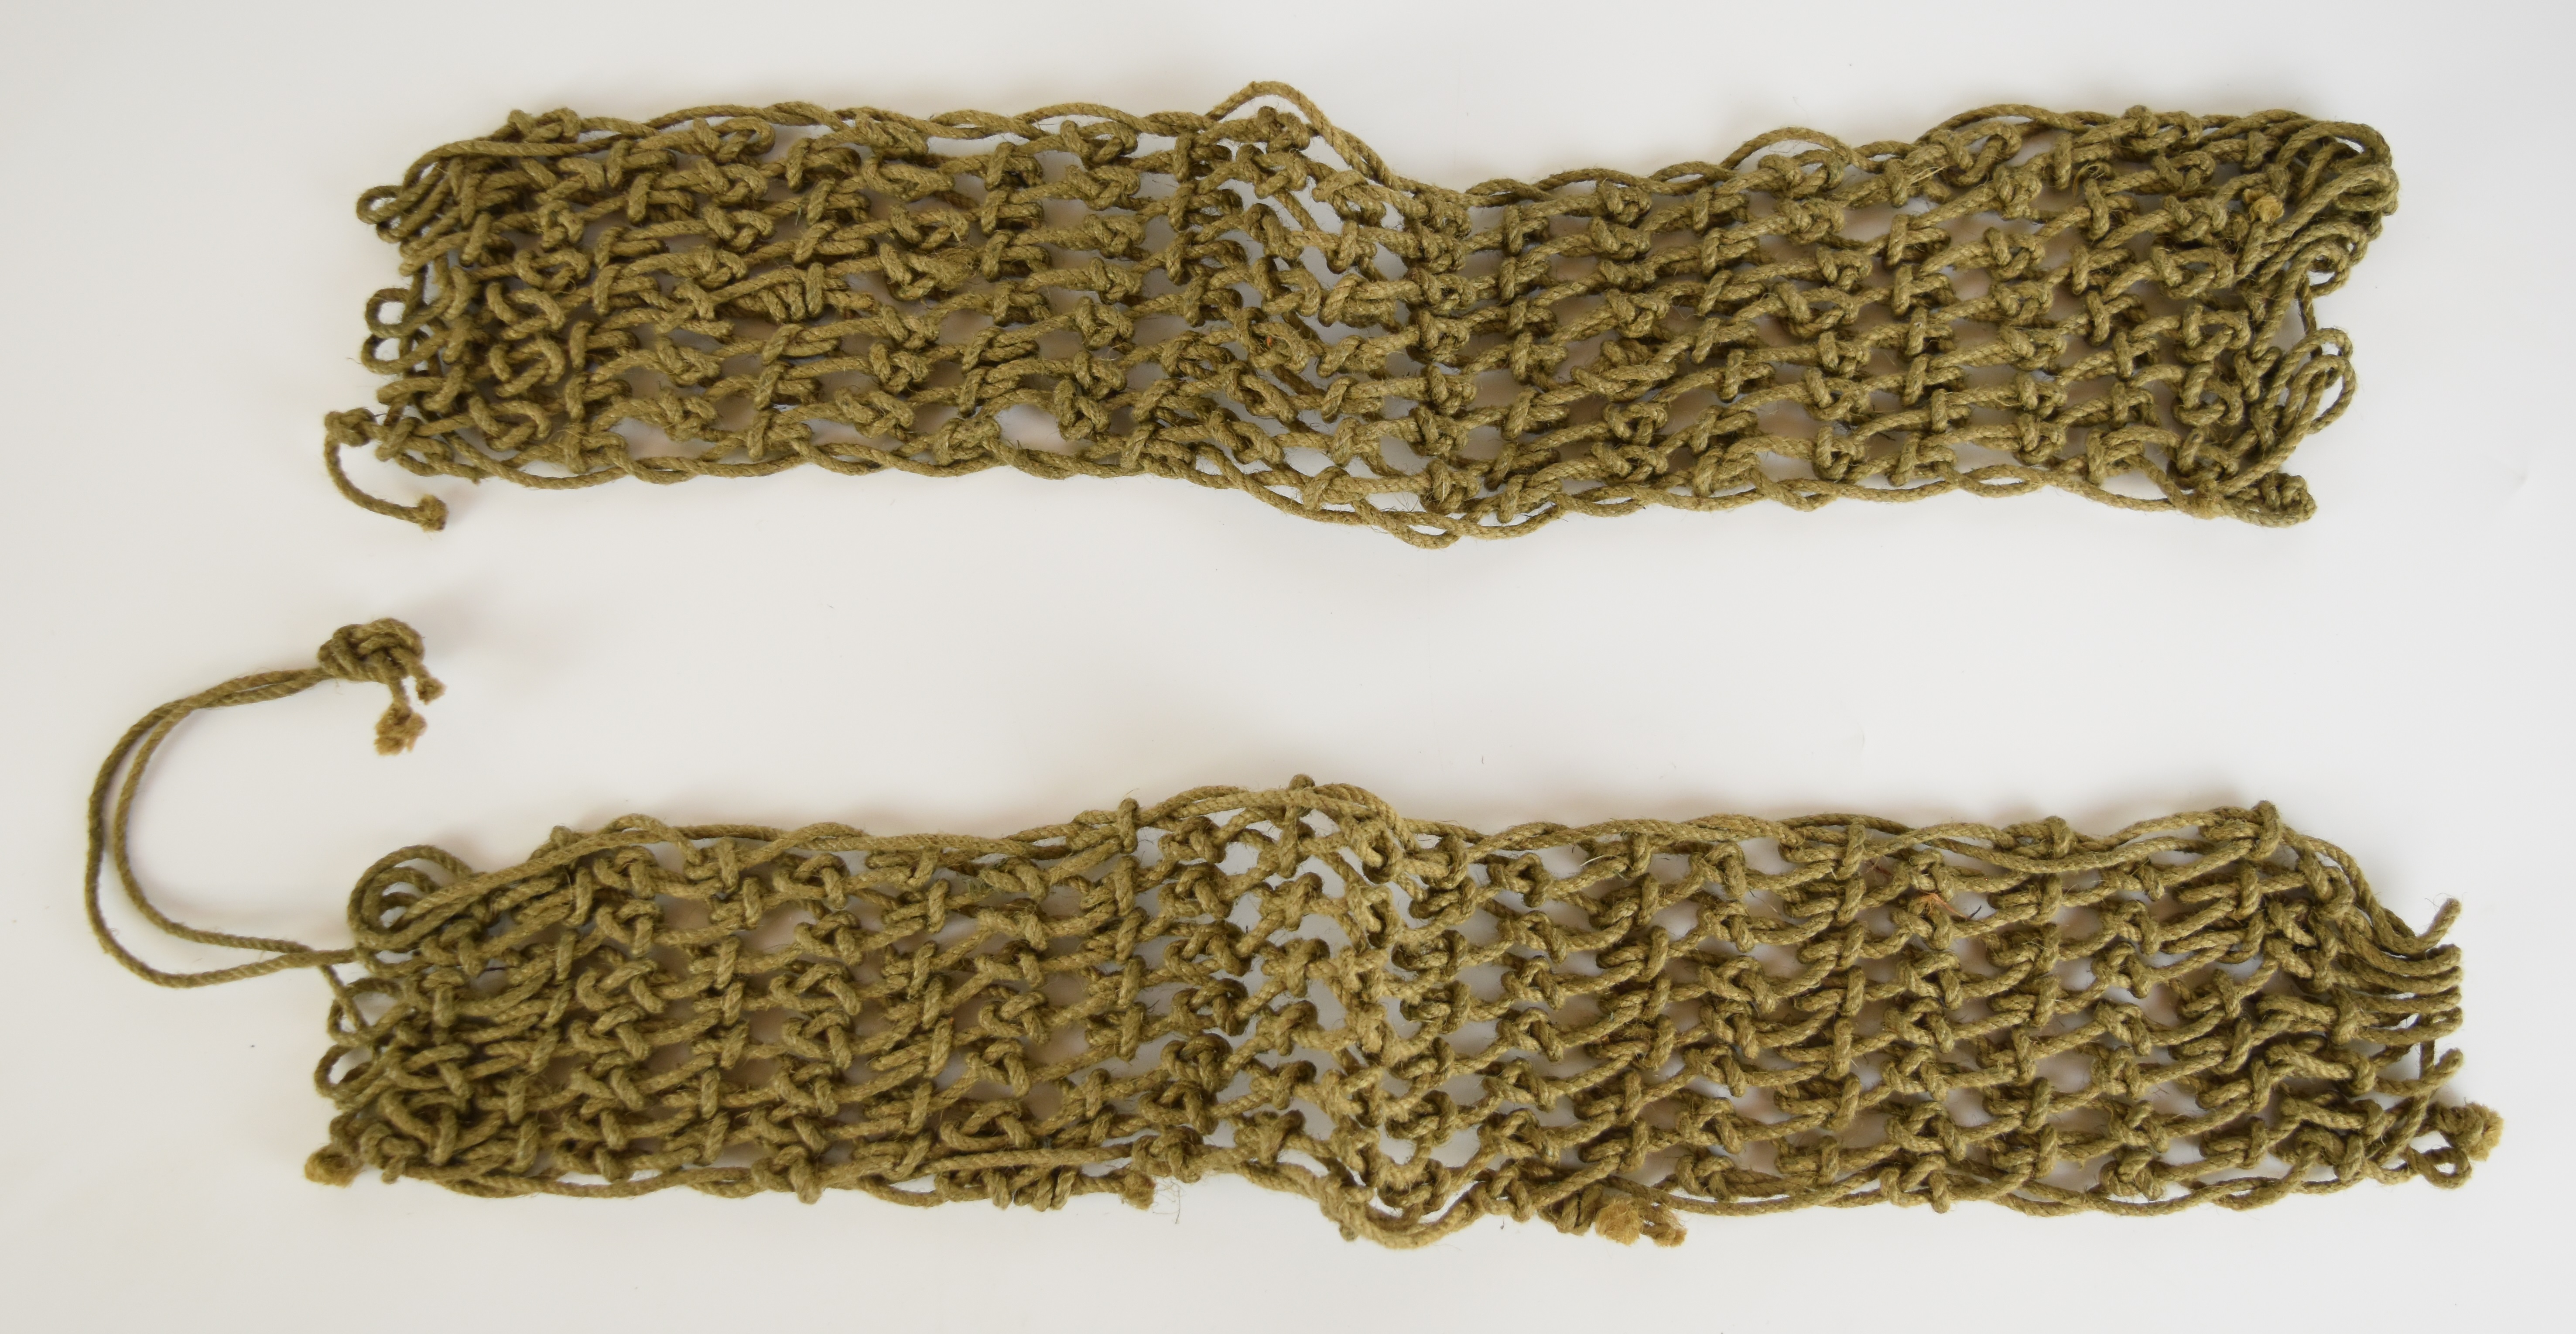 British WW2 SBS boot covers of knotted string / rope construction in order to suppress noise and - Image 2 of 2